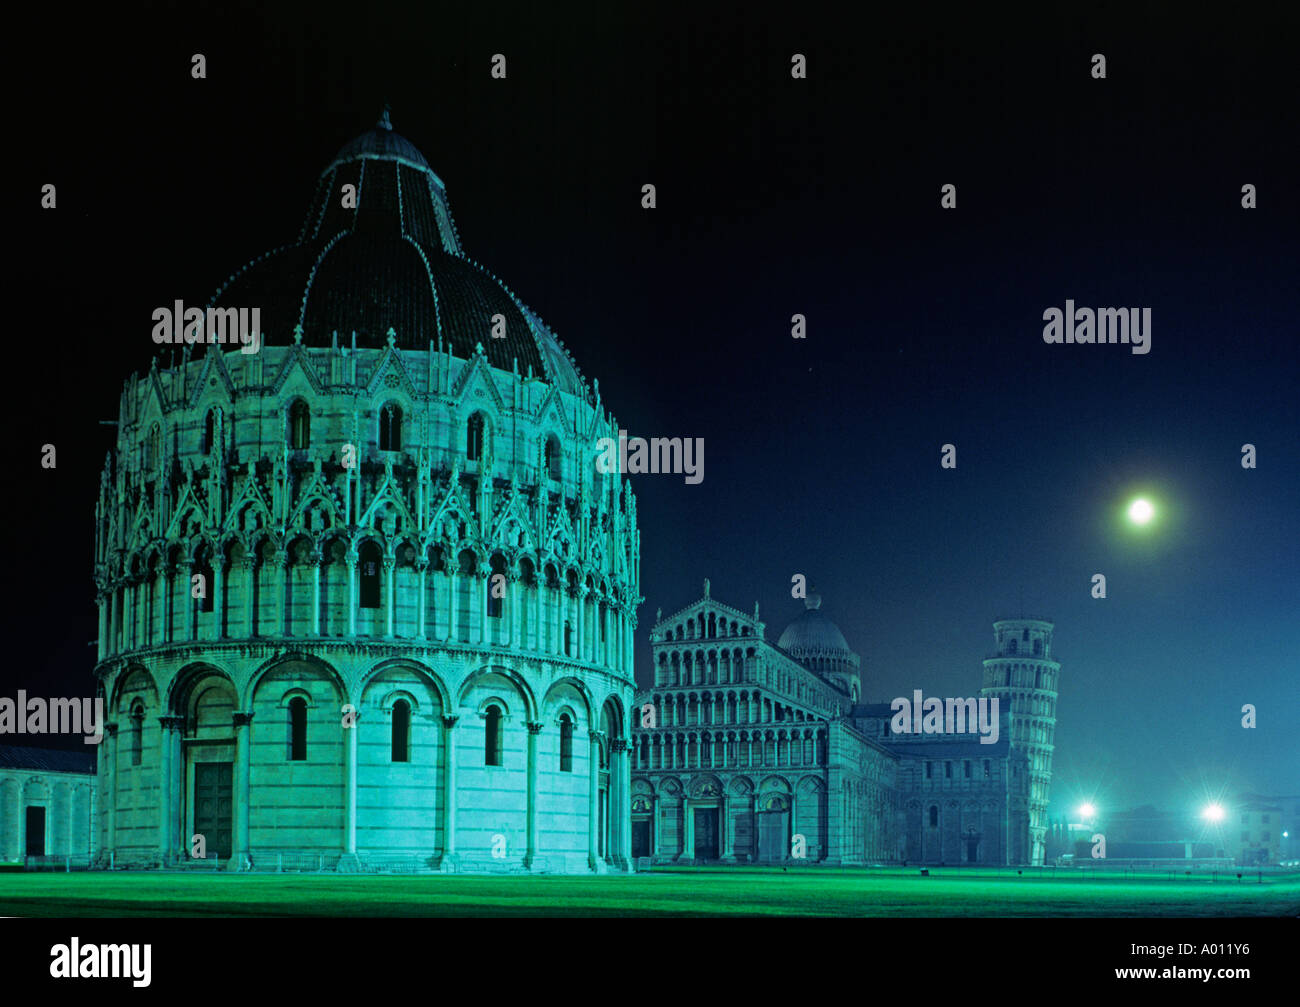 Full moon rises over The BAPTISTERY CATHEDRAL The LEANING TOWER OF PISA 12th Cent PISA ITALY Stock Photo